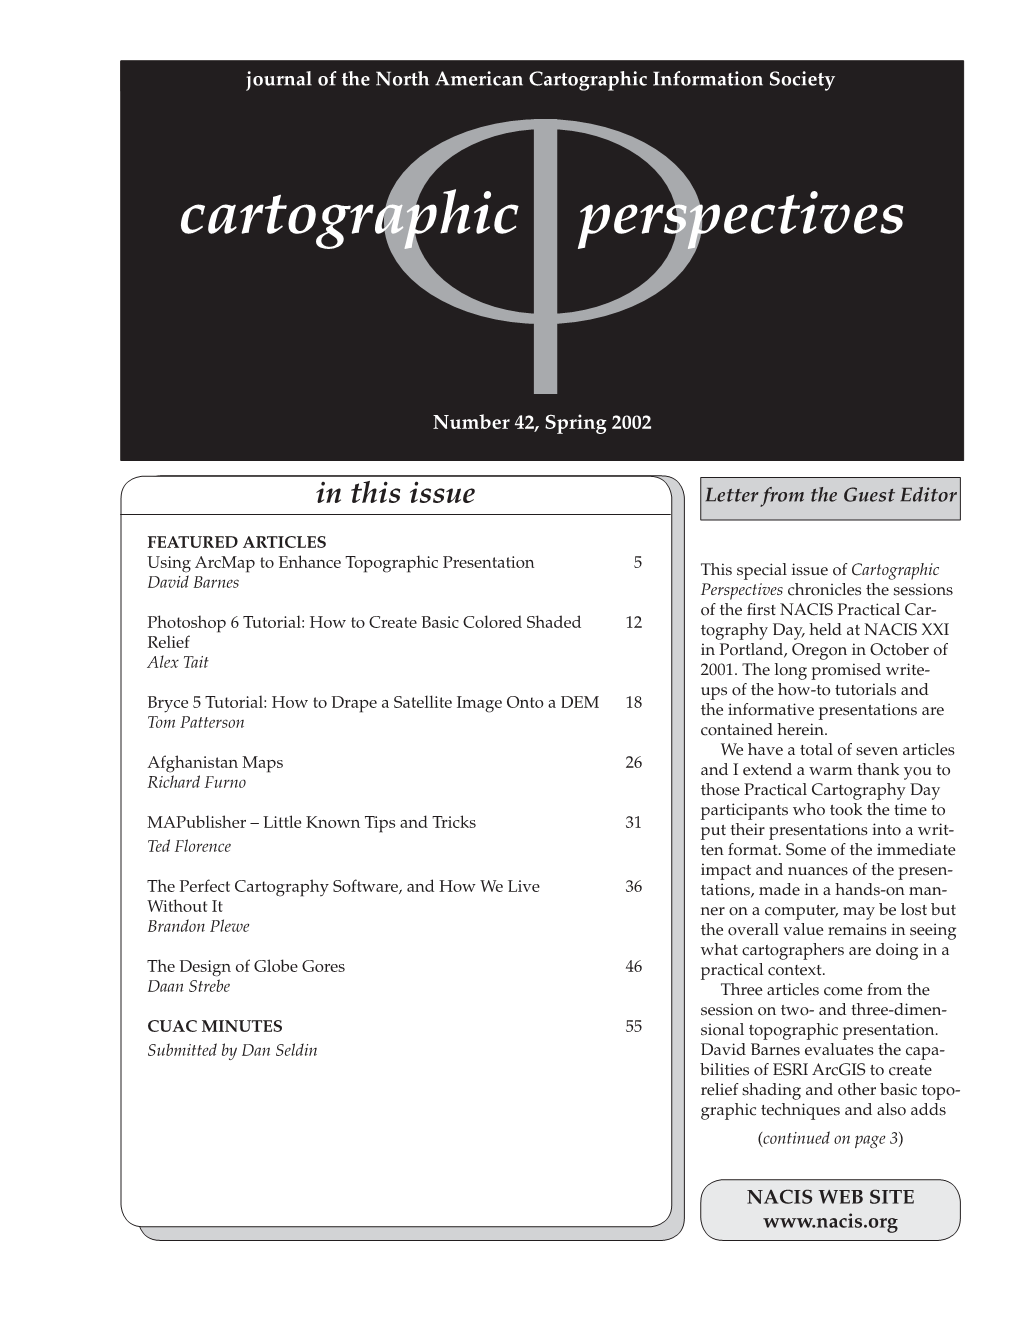 Cartographic Perspectives Information Society 